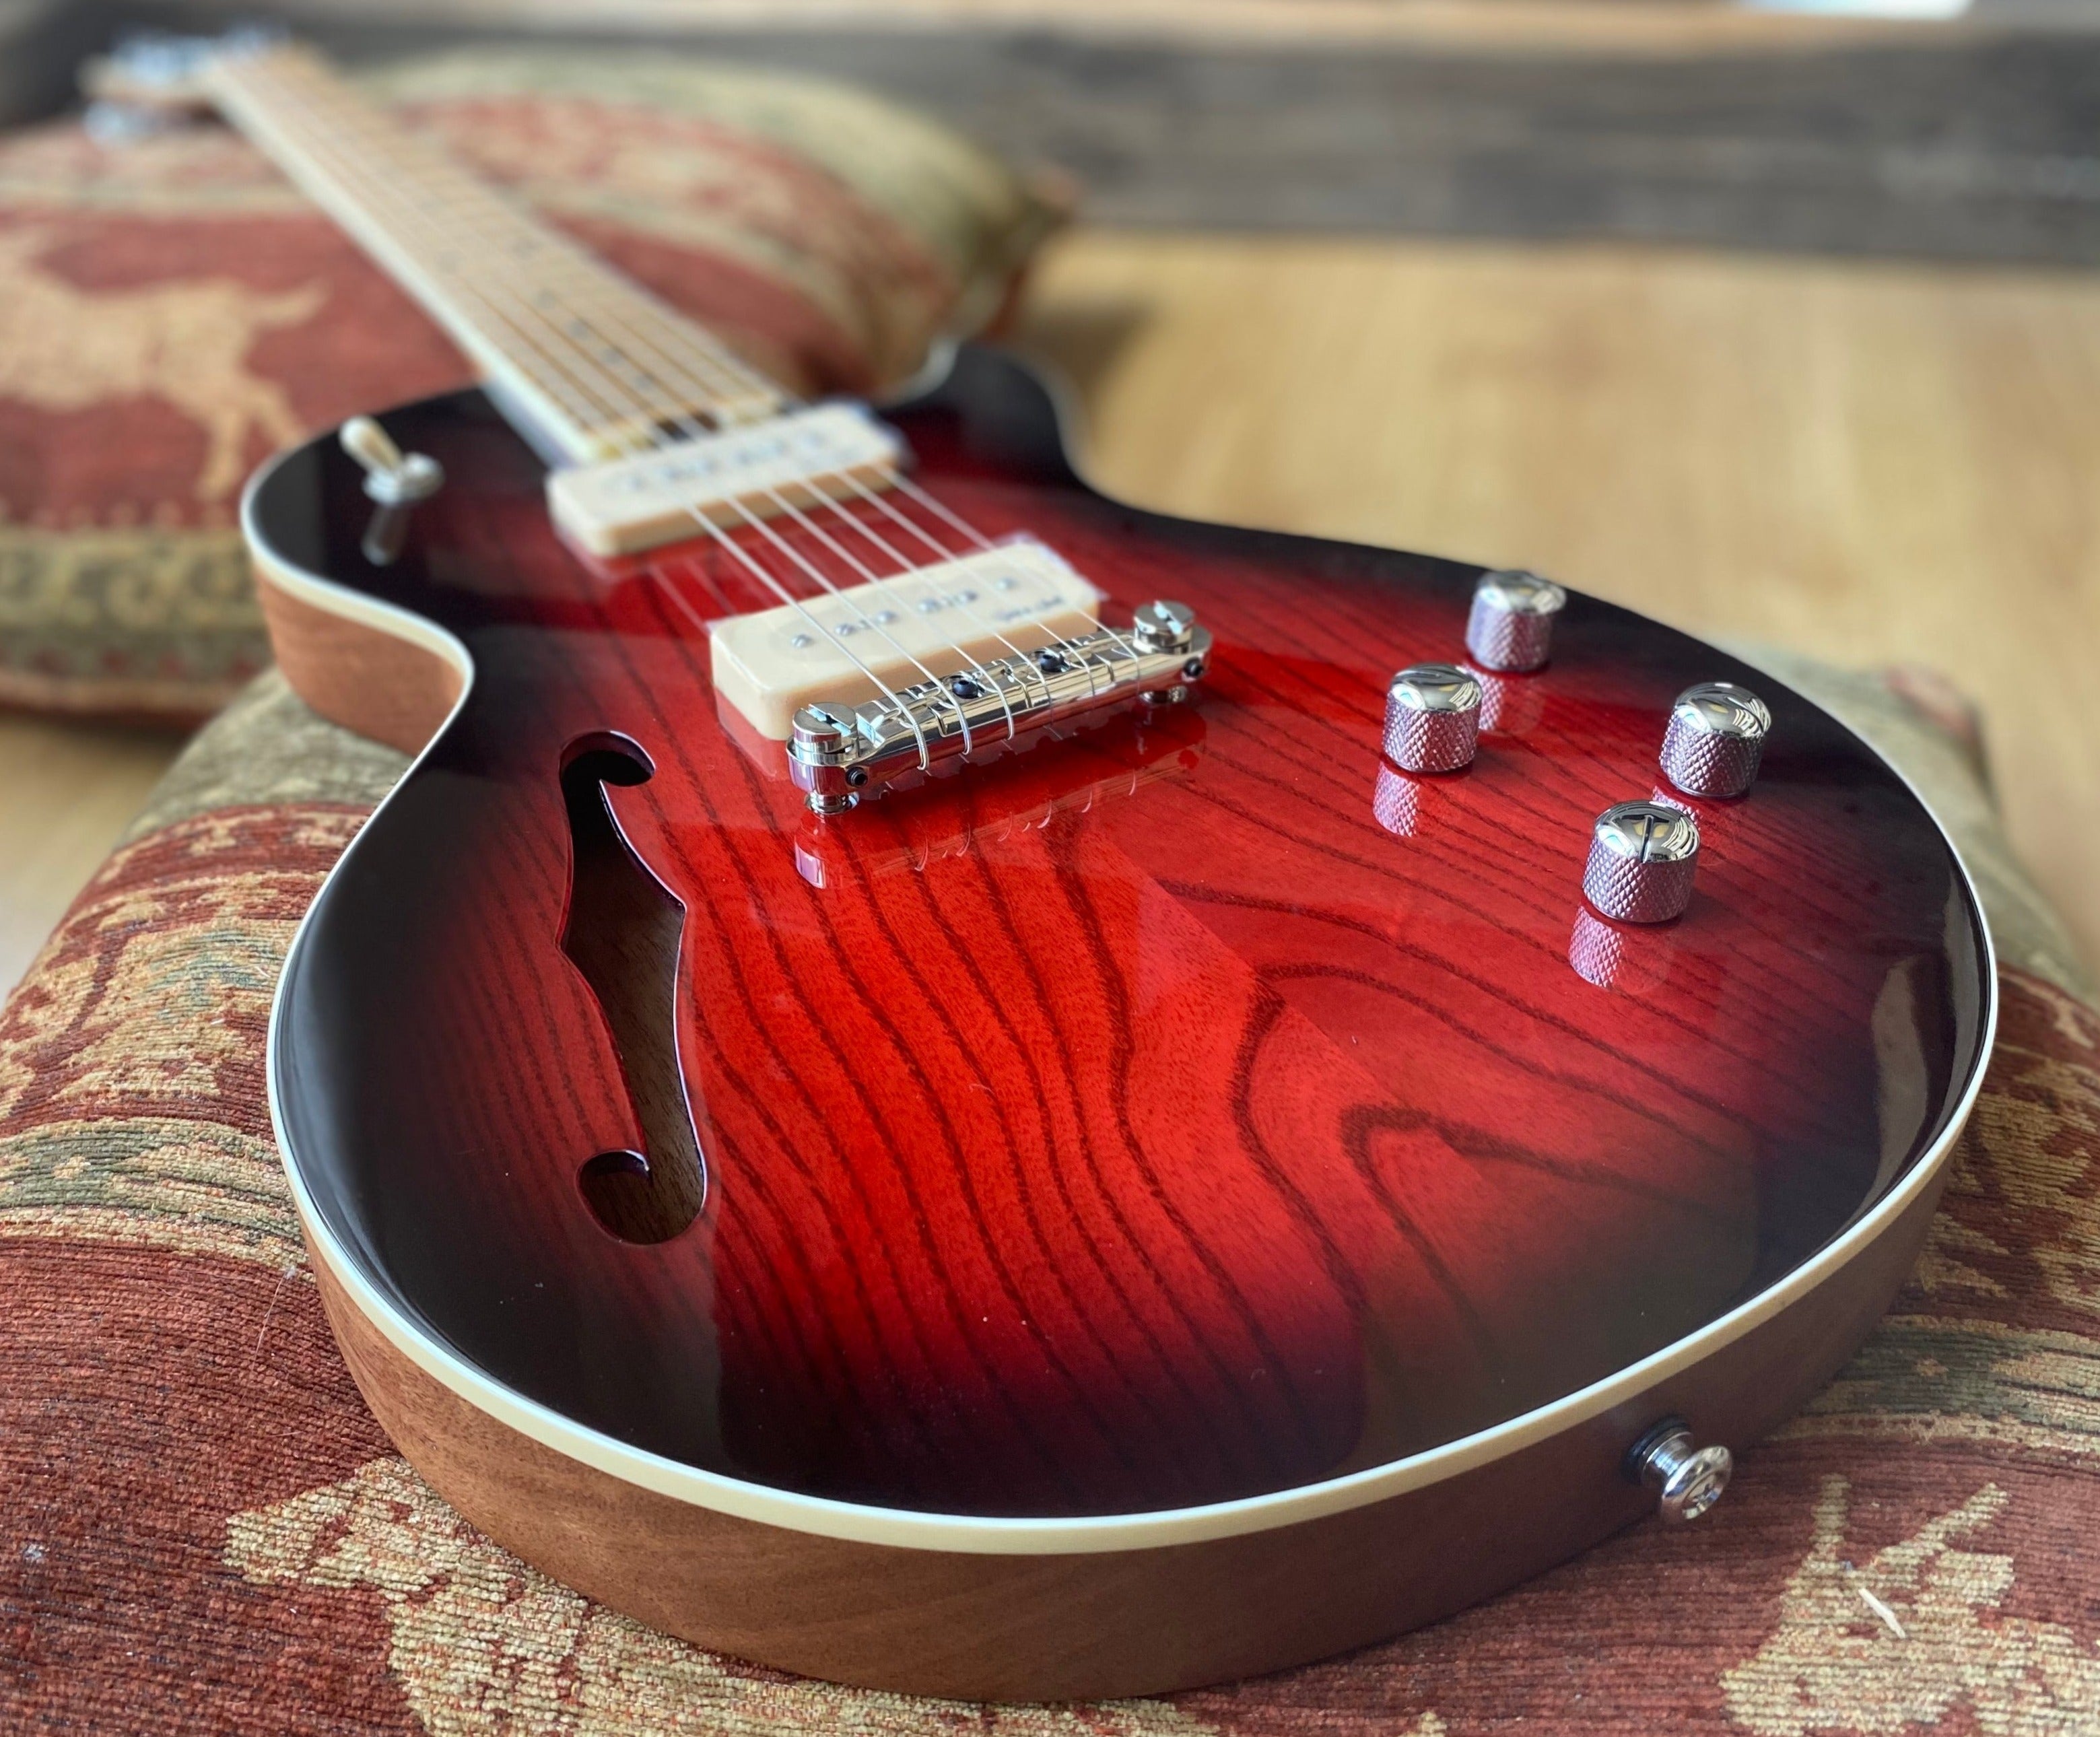 Gordon Smith GS Deluxe Semi Solid 60 Swamp Ash Top Custom Strawberry Burst, Electric Guitar for sale at Richards Guitars.